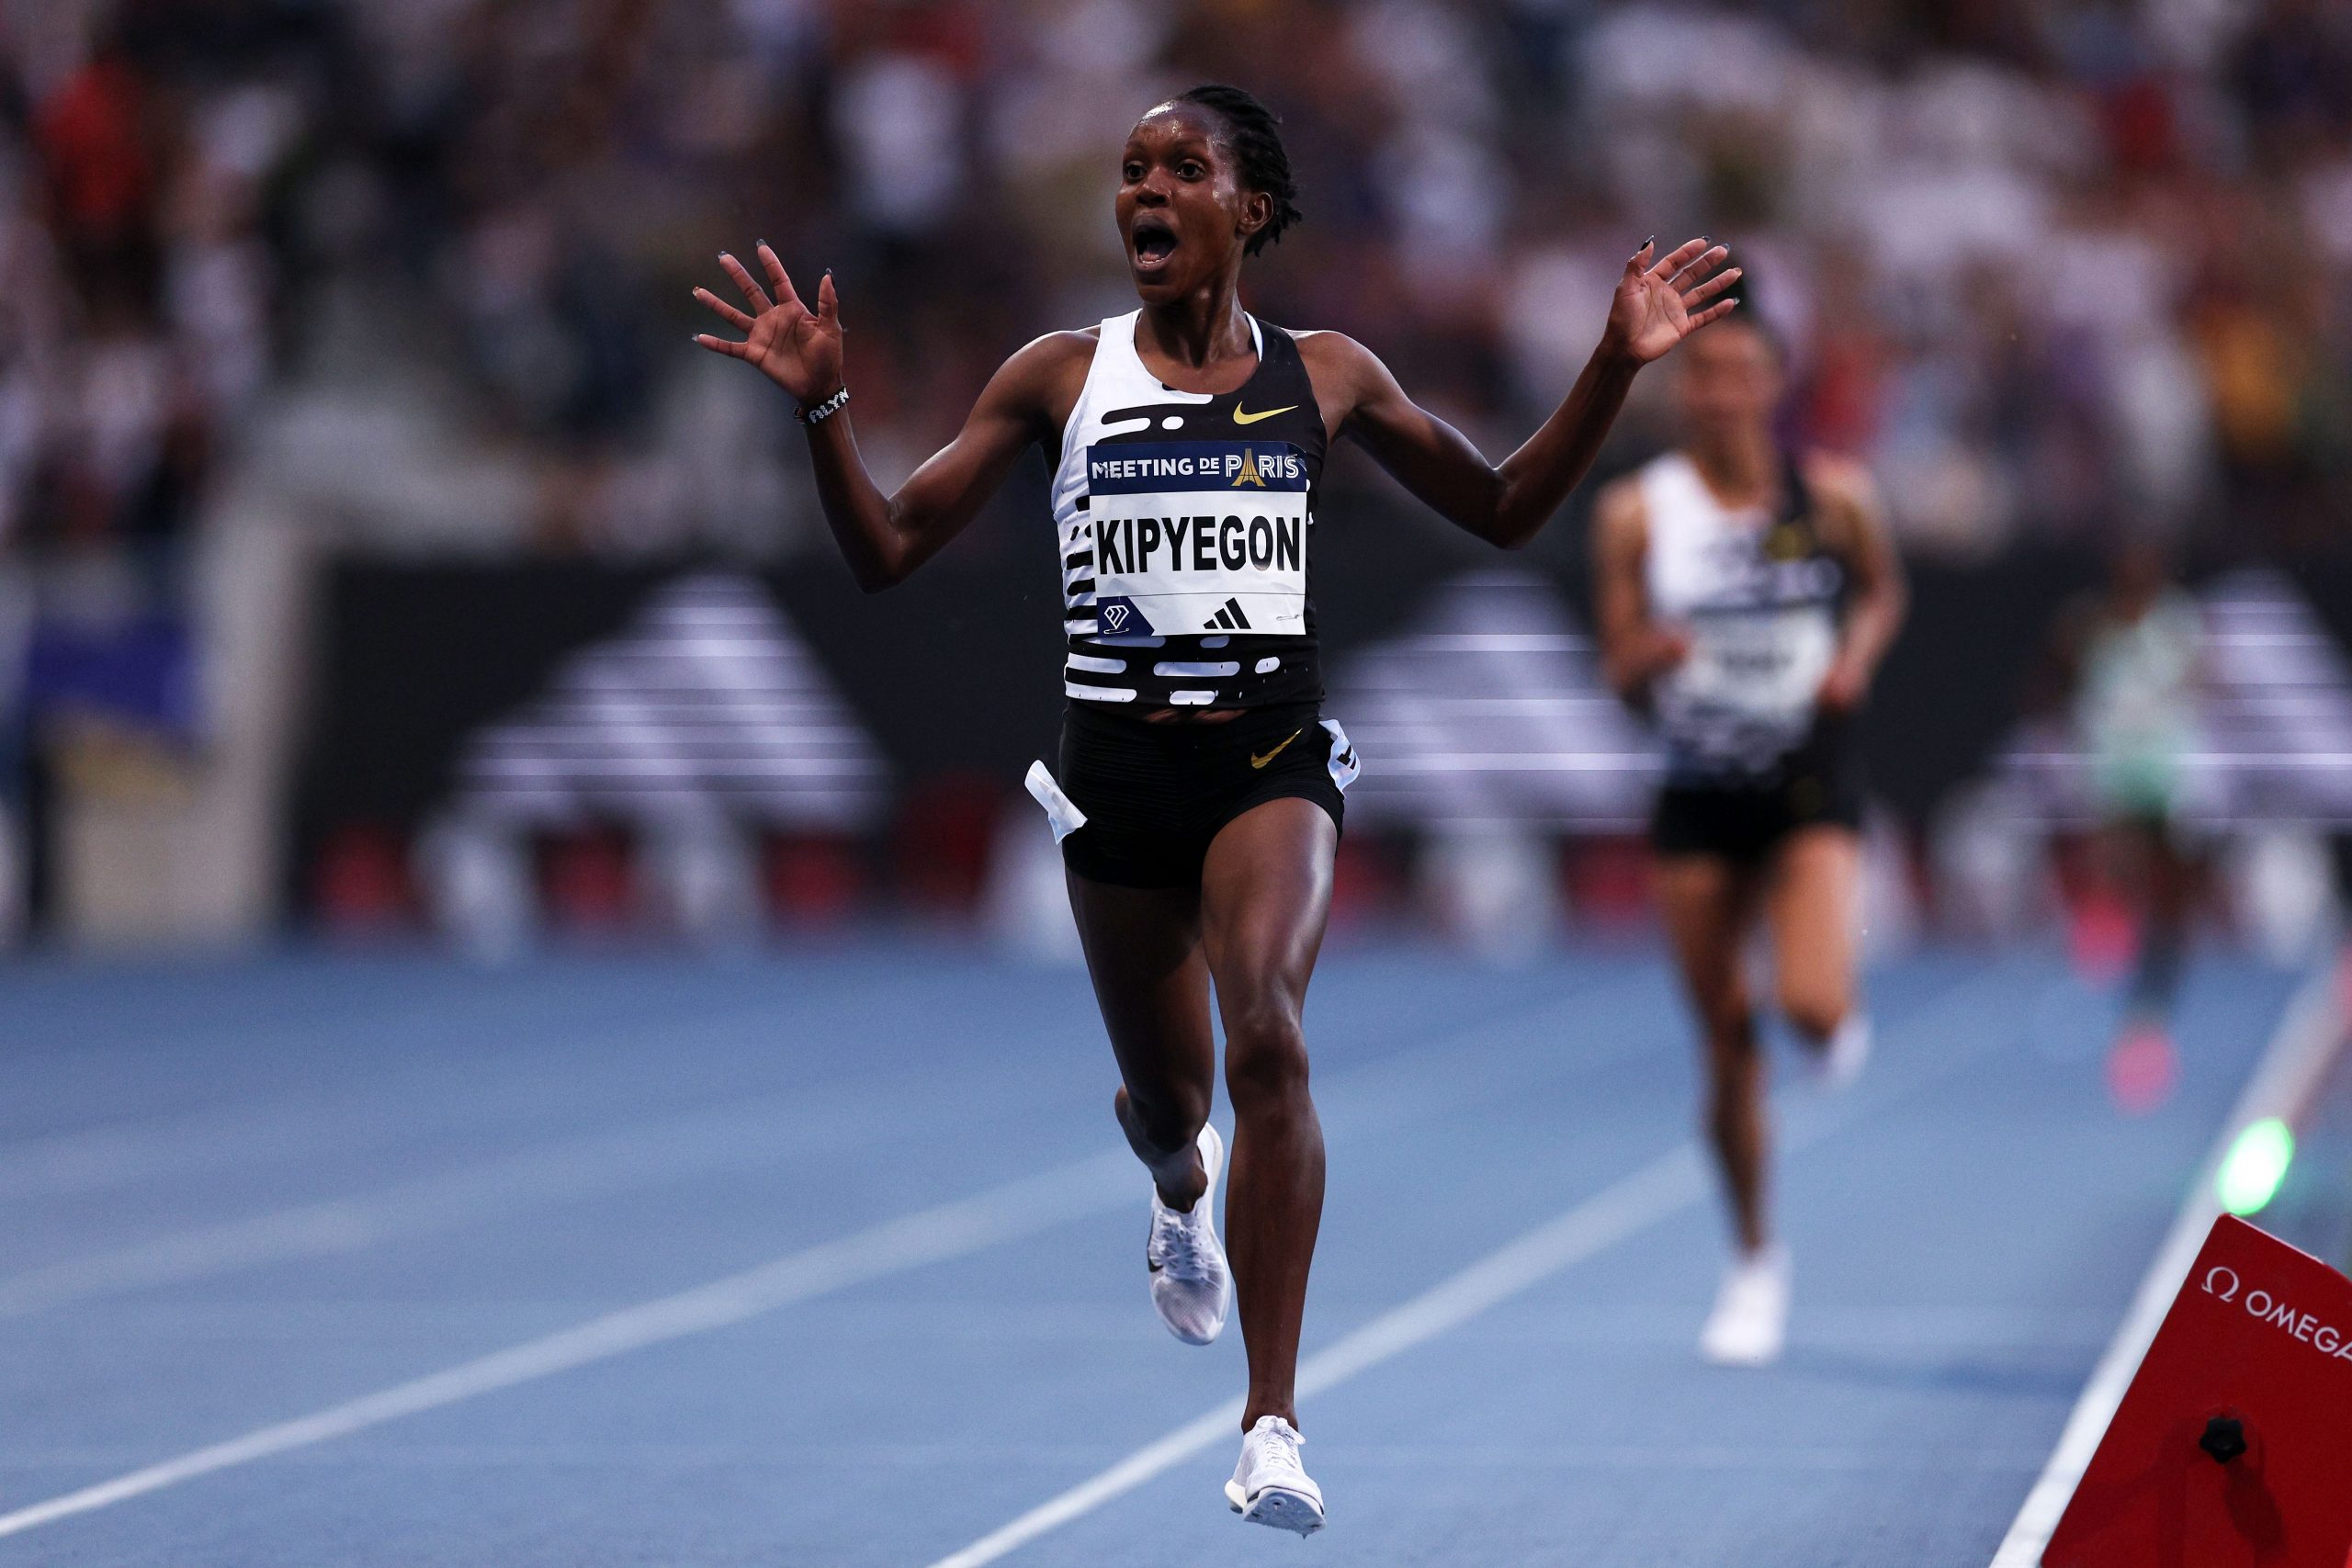 Faith Kipyegon wins the 5000m at the Diamond League meeting in Paris (© Getty Images)